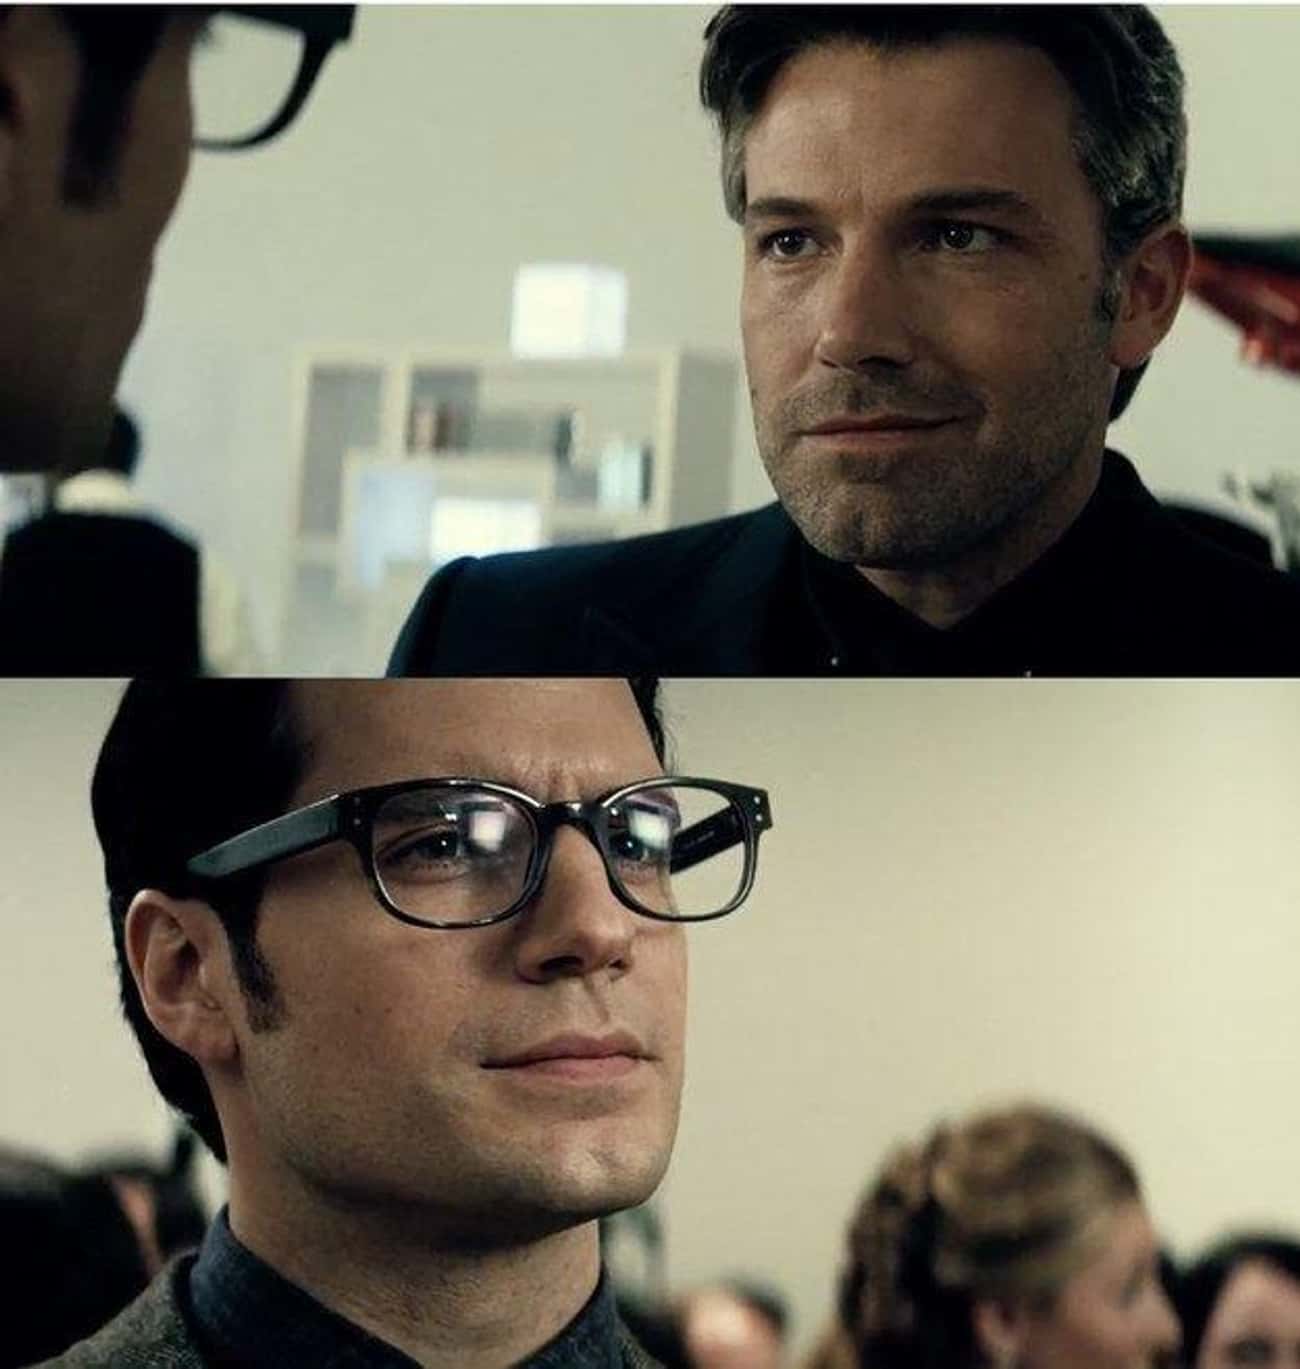 Clark Kent Tries To Expose Batman As A Villain Simply Because He Doesn't Like Him